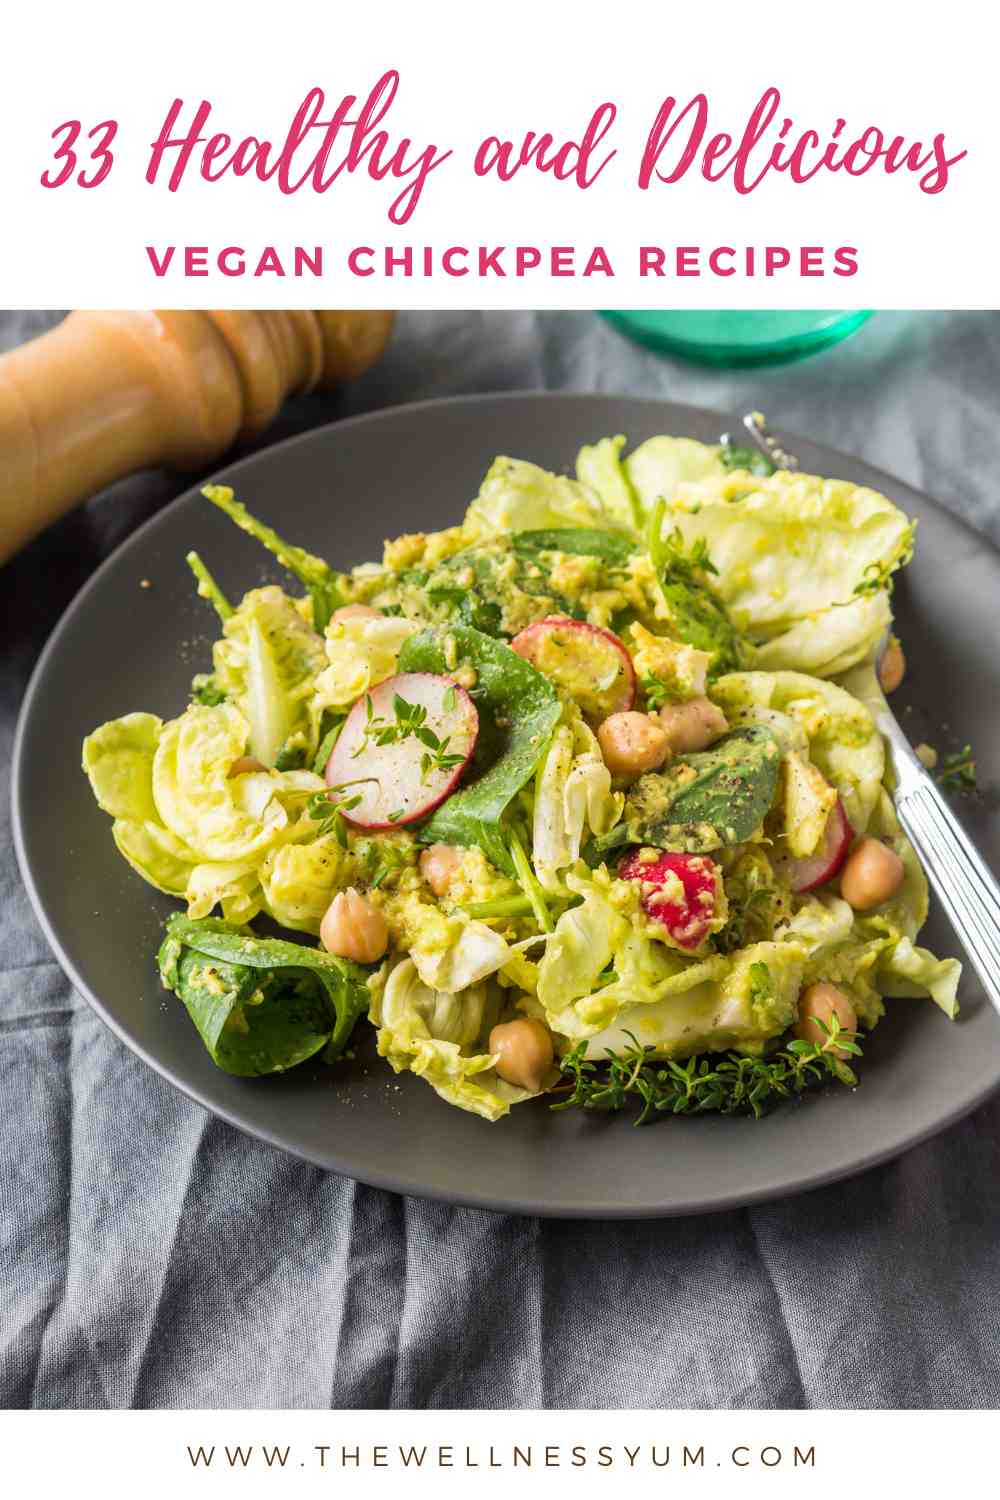 Healthy and Delicious Vegan Chickpea Recipes